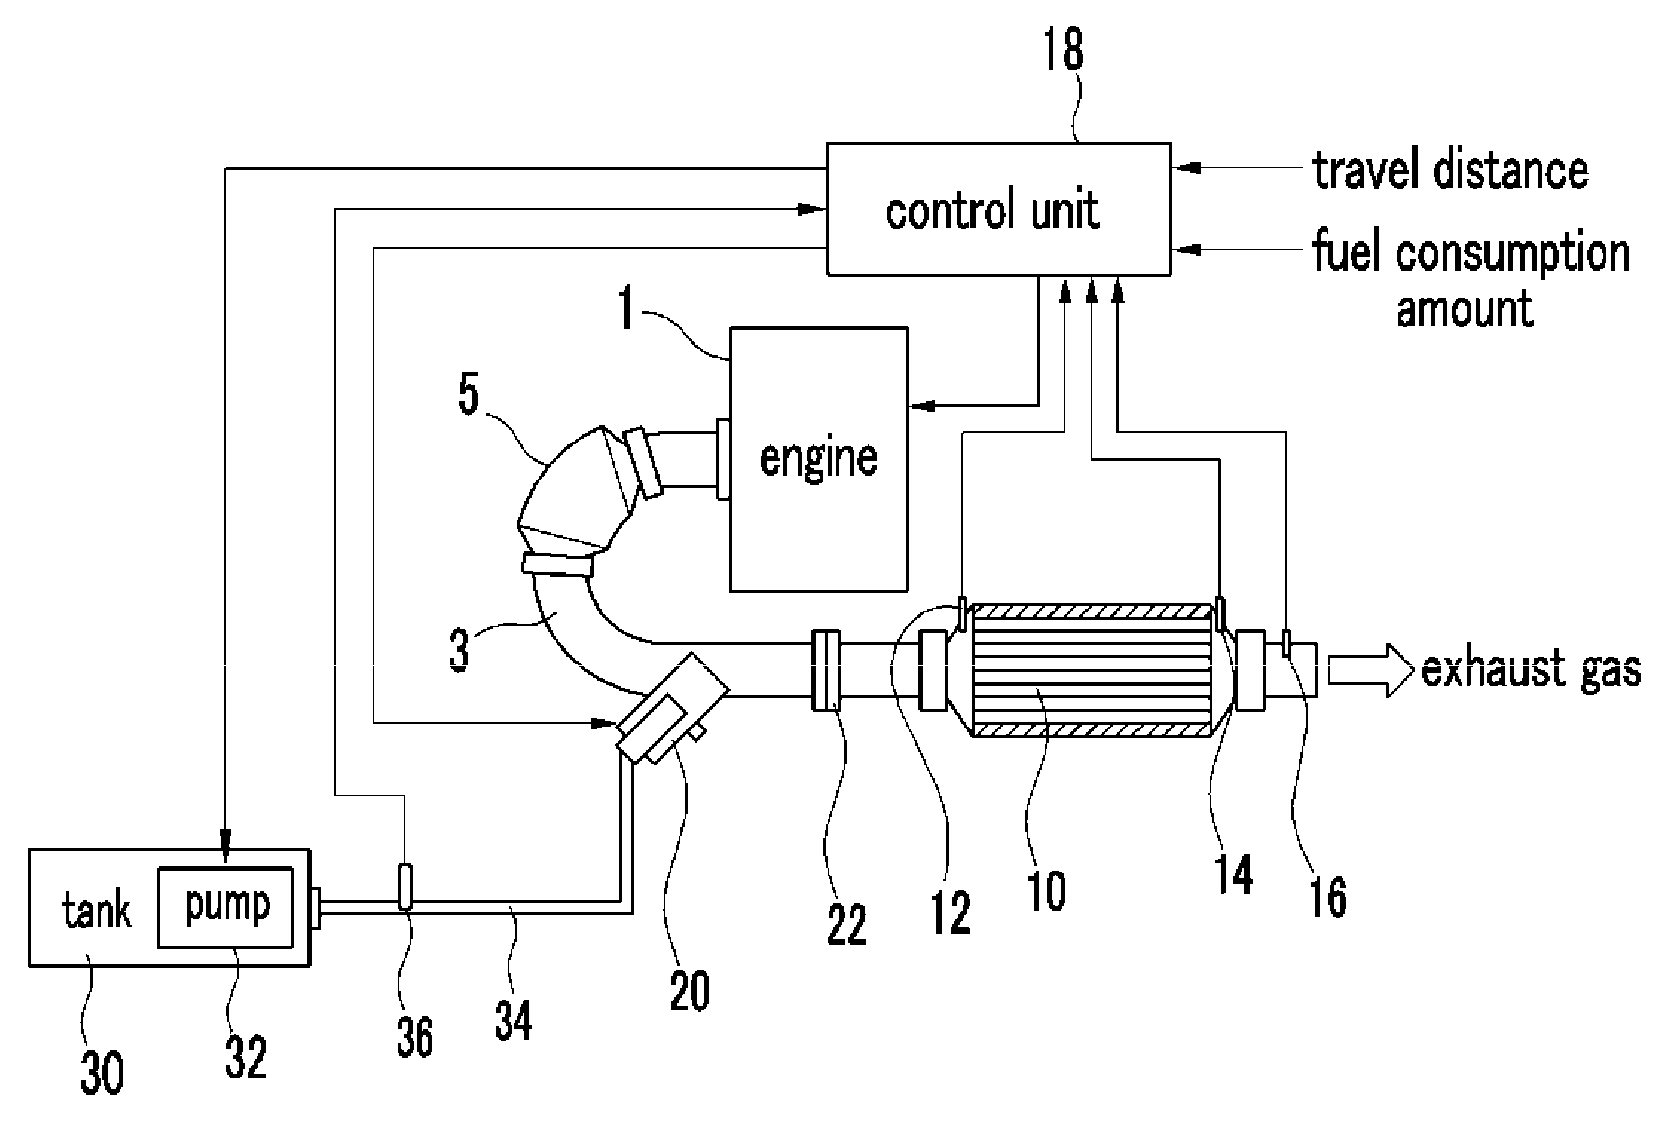 Method and apparatus for controlling urea injection amount of vehicle